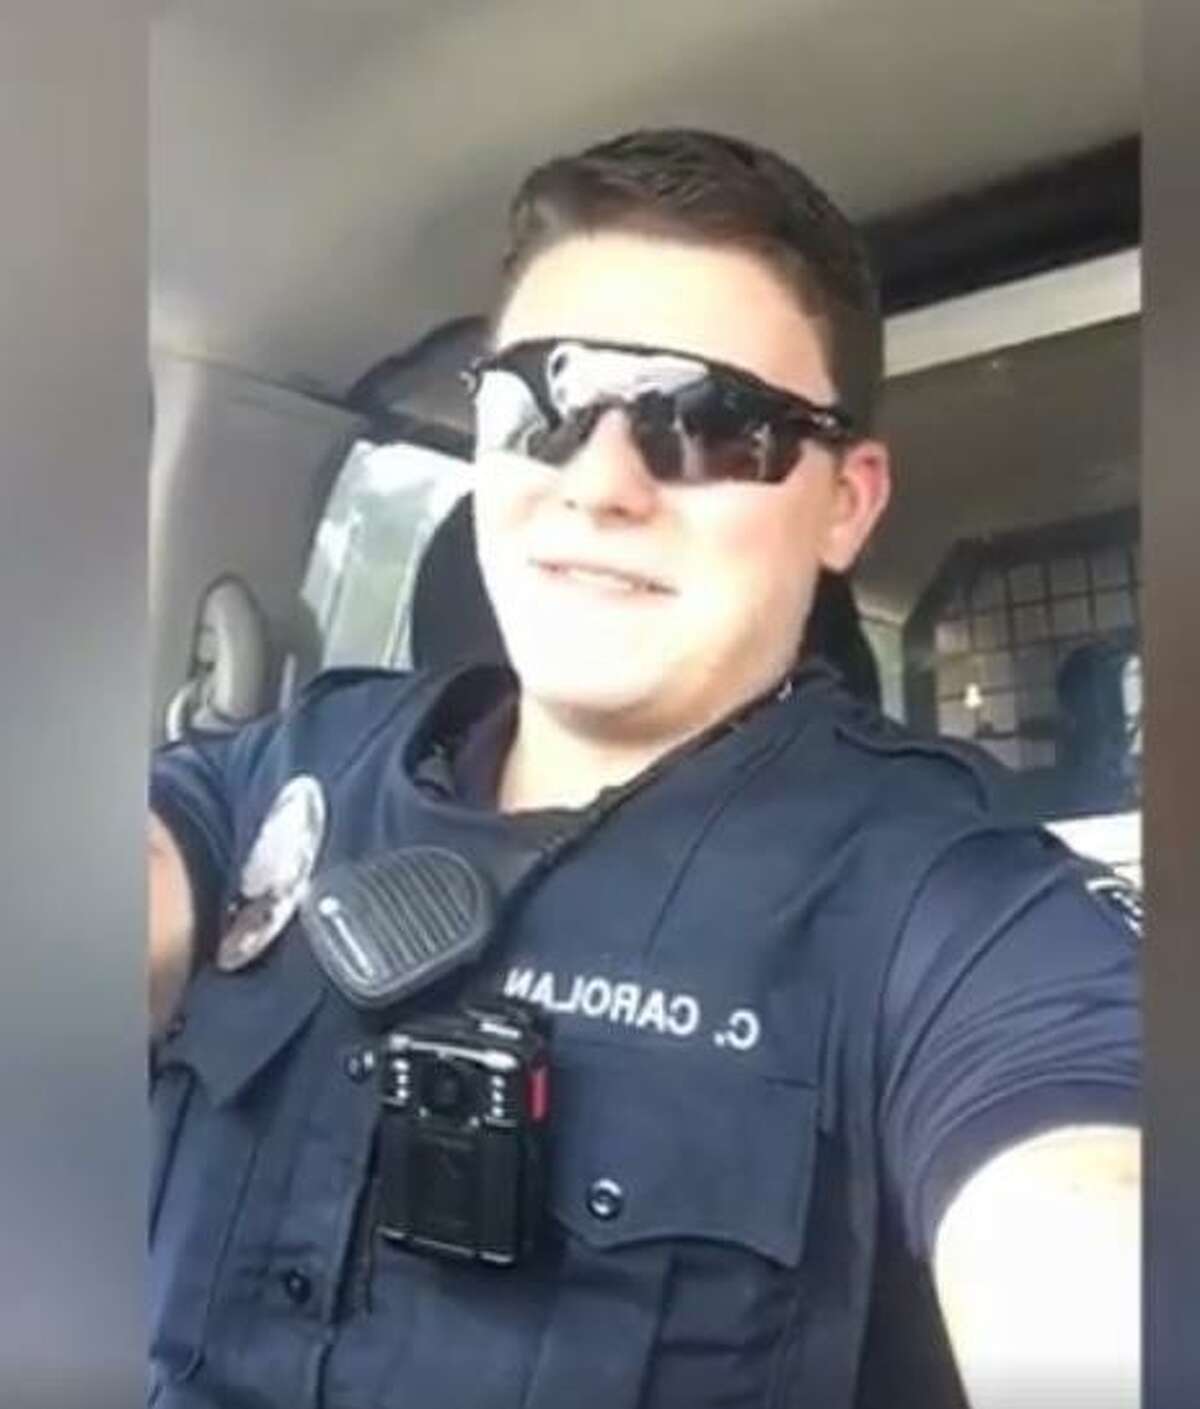 As some may be able to tell, this was not Officer Carolan’s first time lip-syncing to the Zac Brown Band.